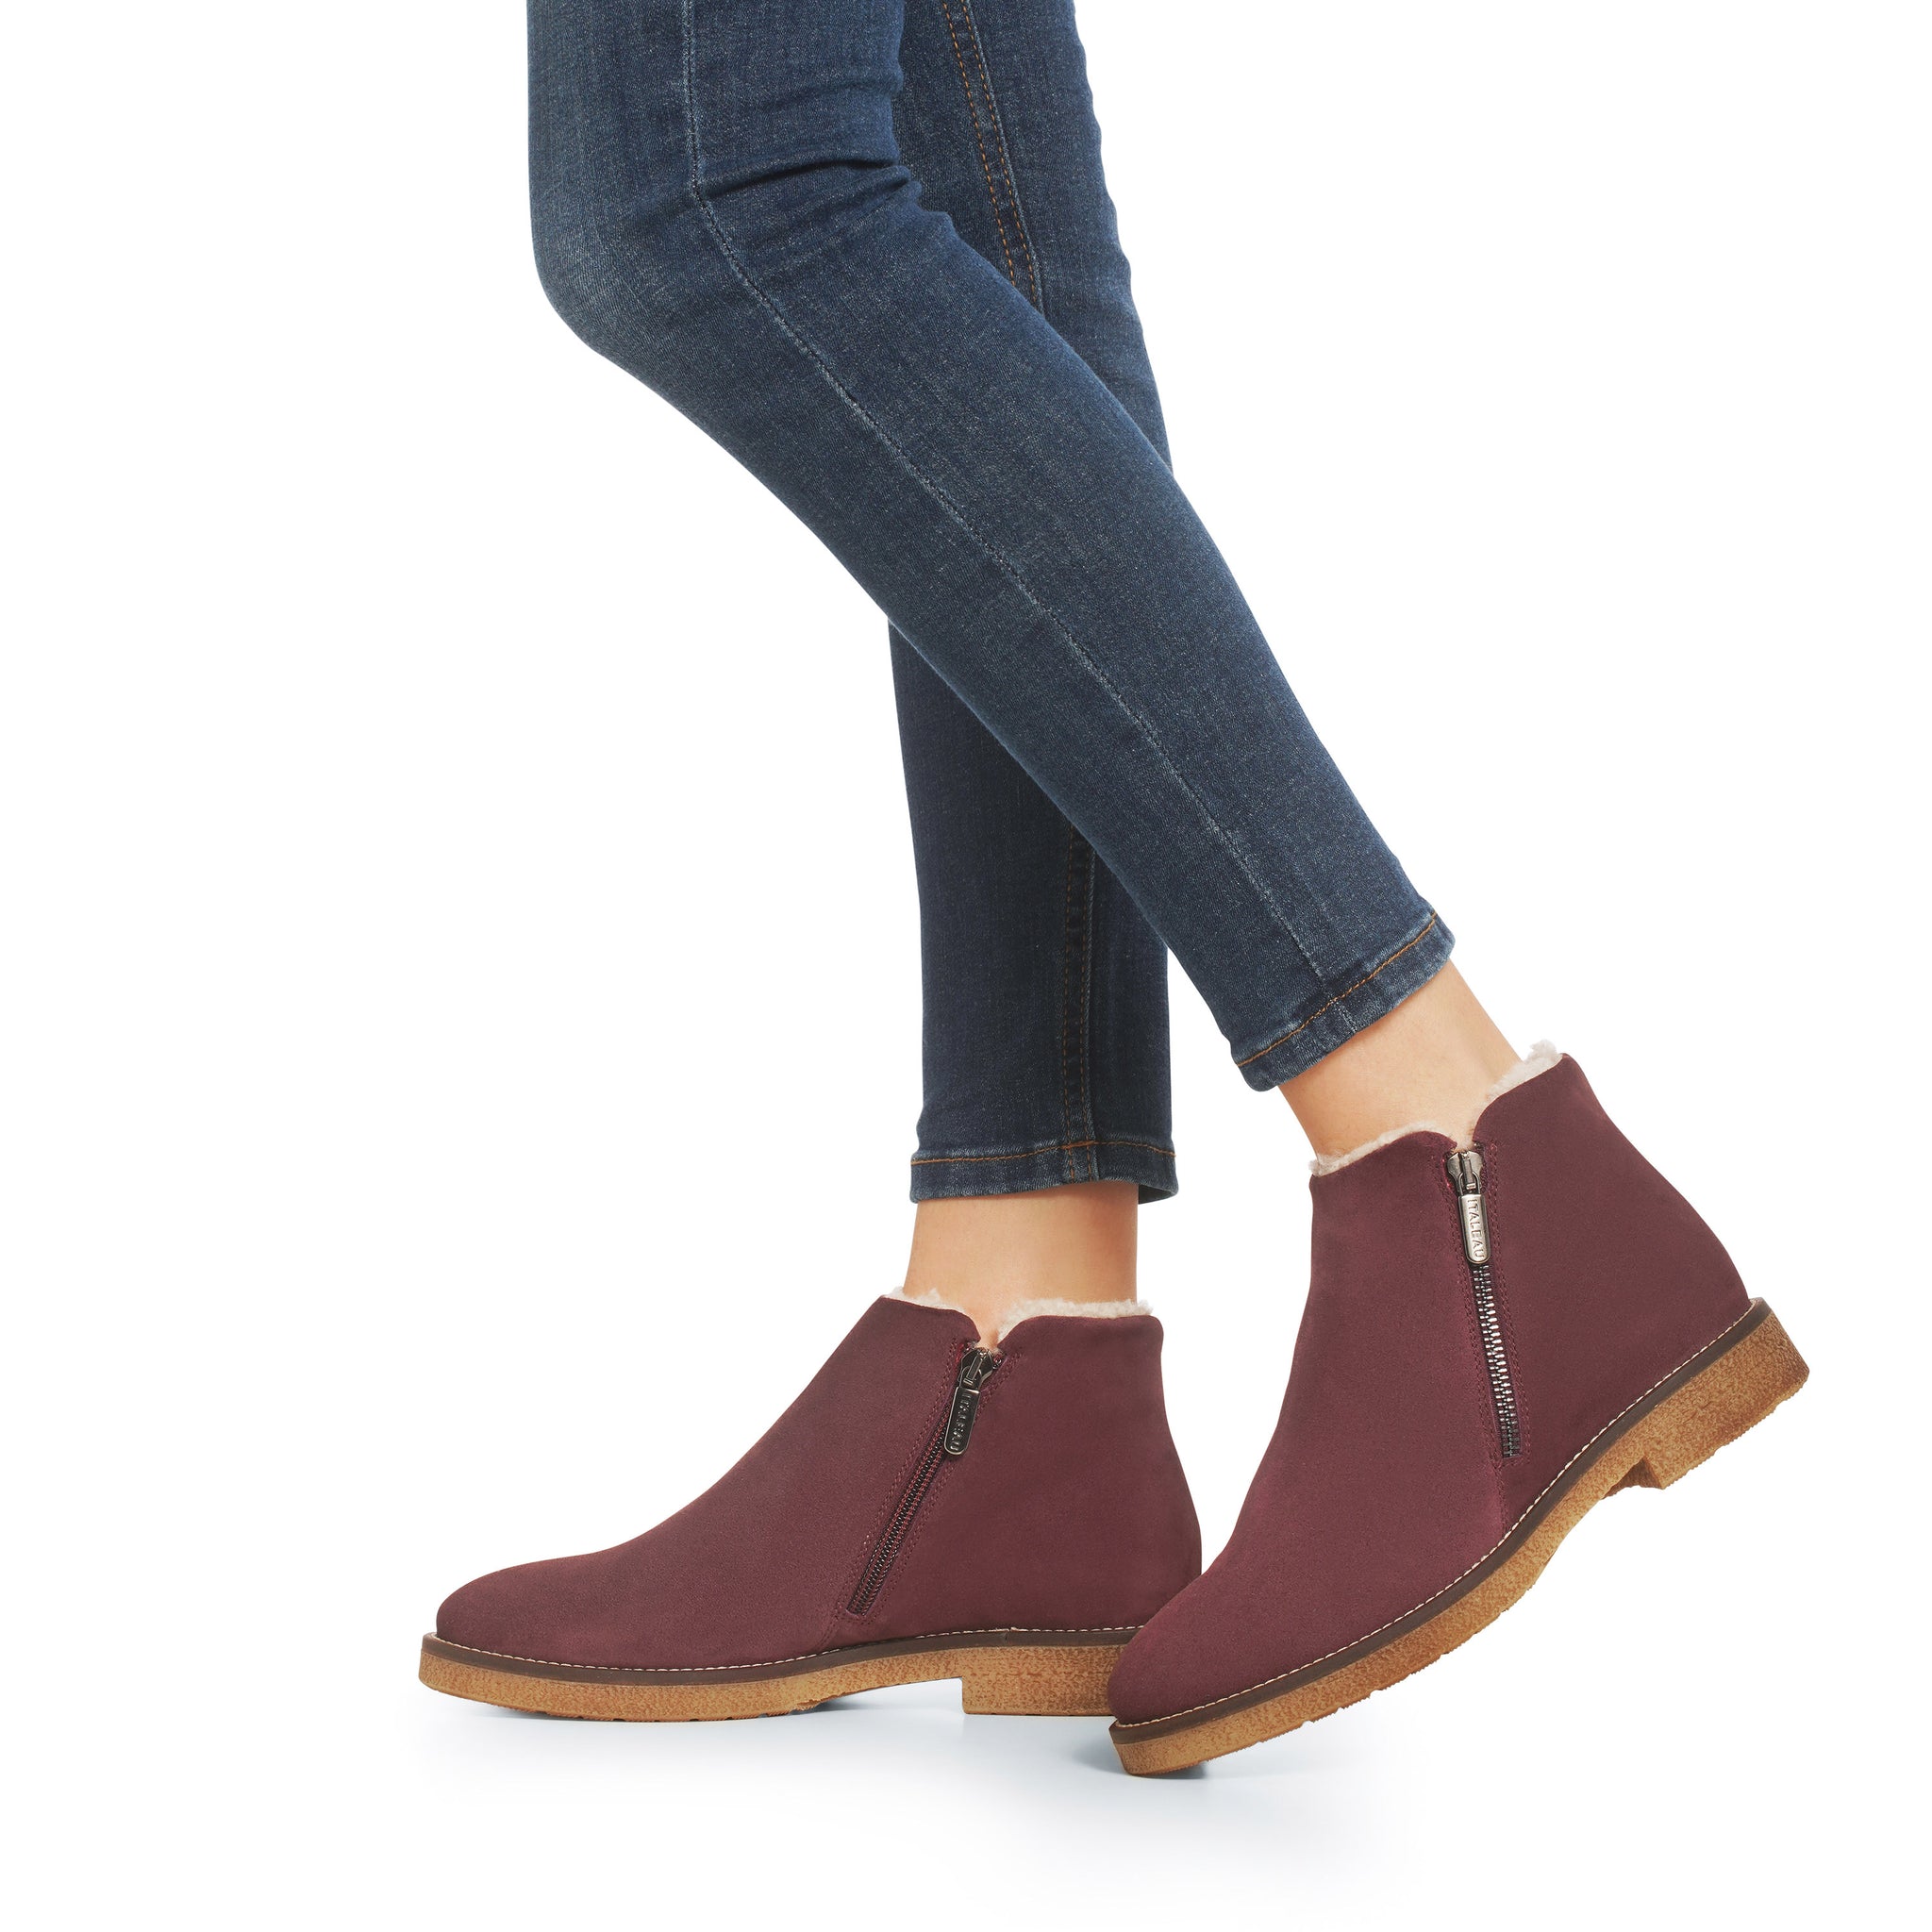 Foliana Shearling Boots | Women’s Ankle Boots | Italian Suede Boots ...